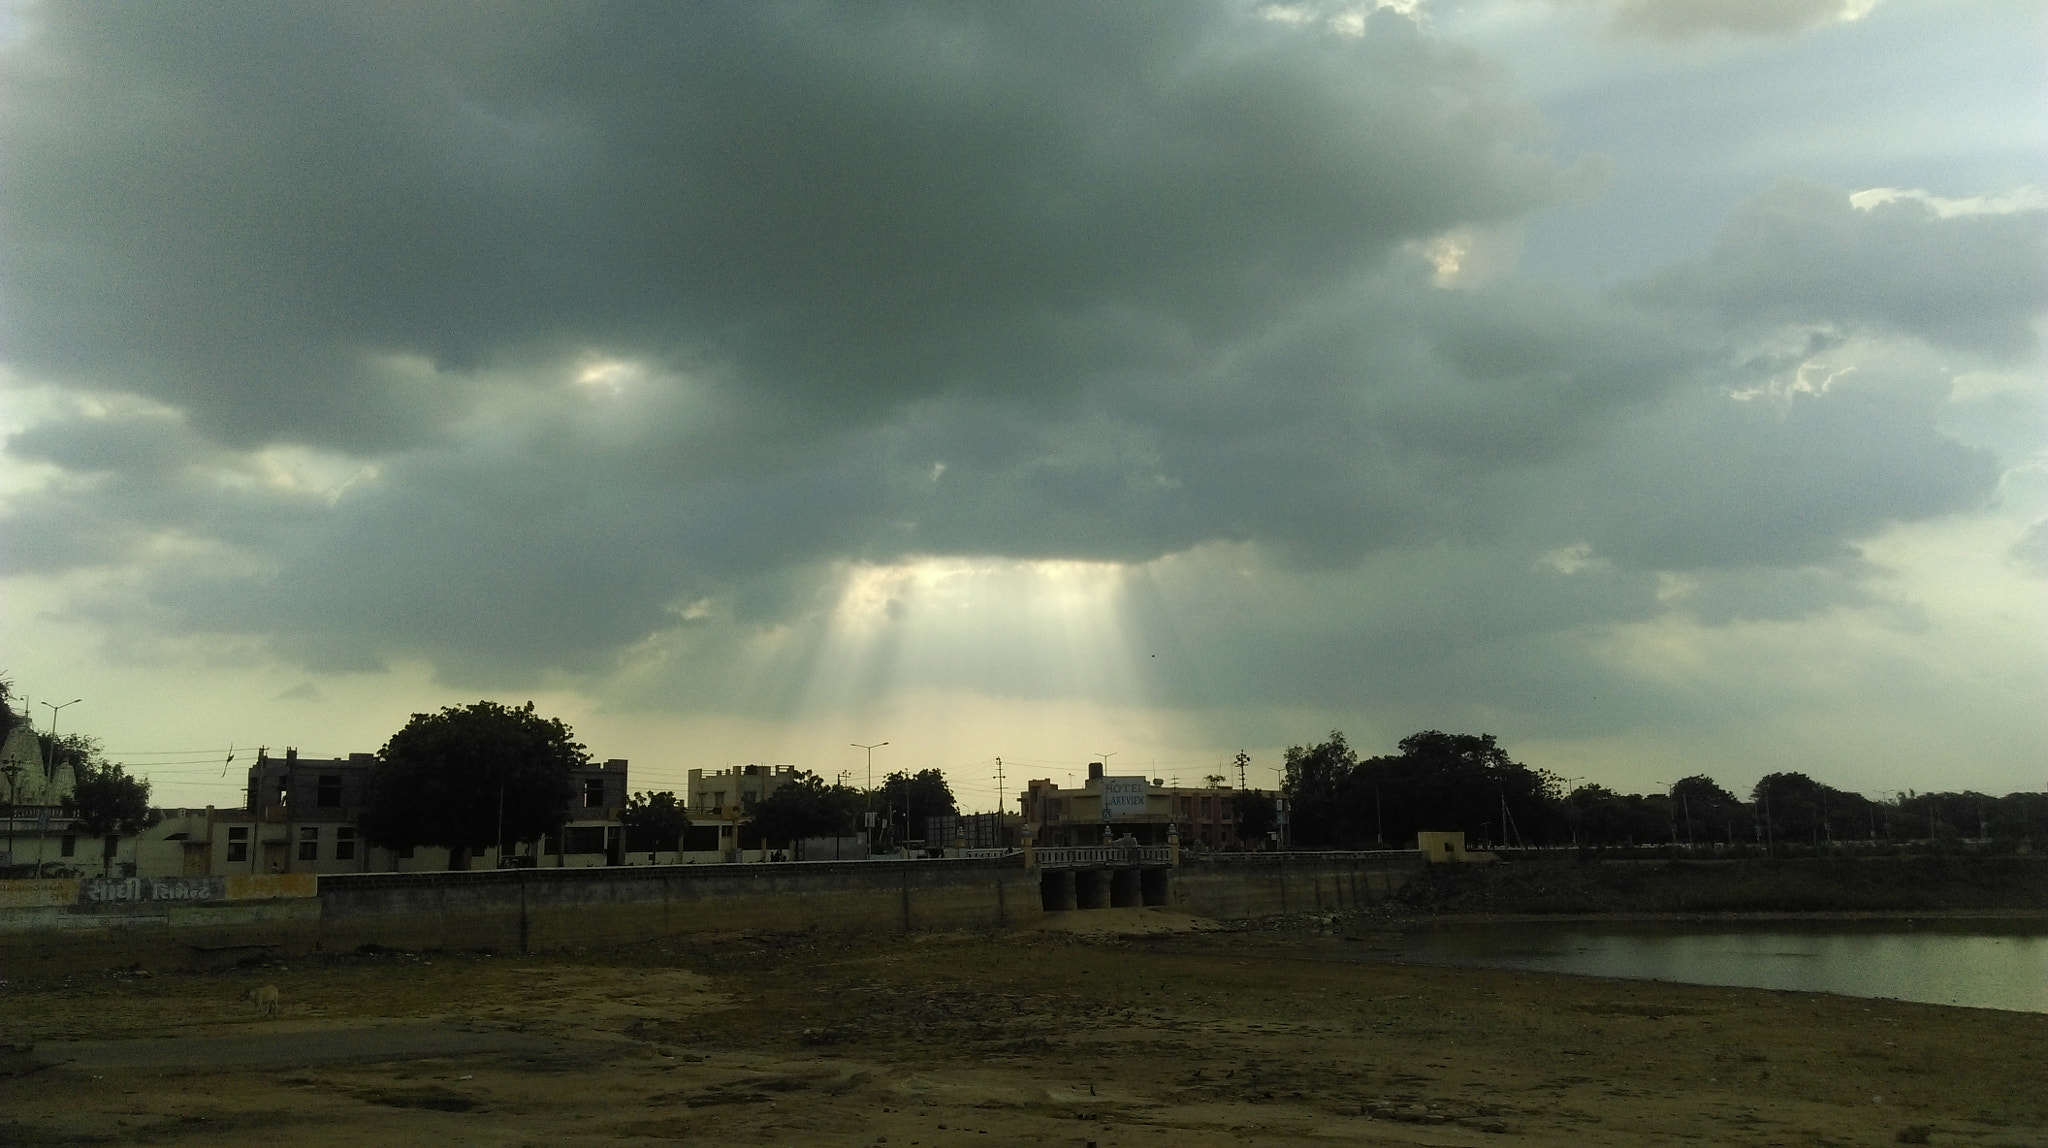 HTC DESIRE 826 DUAL SIM sample photo. A storm brewing photography